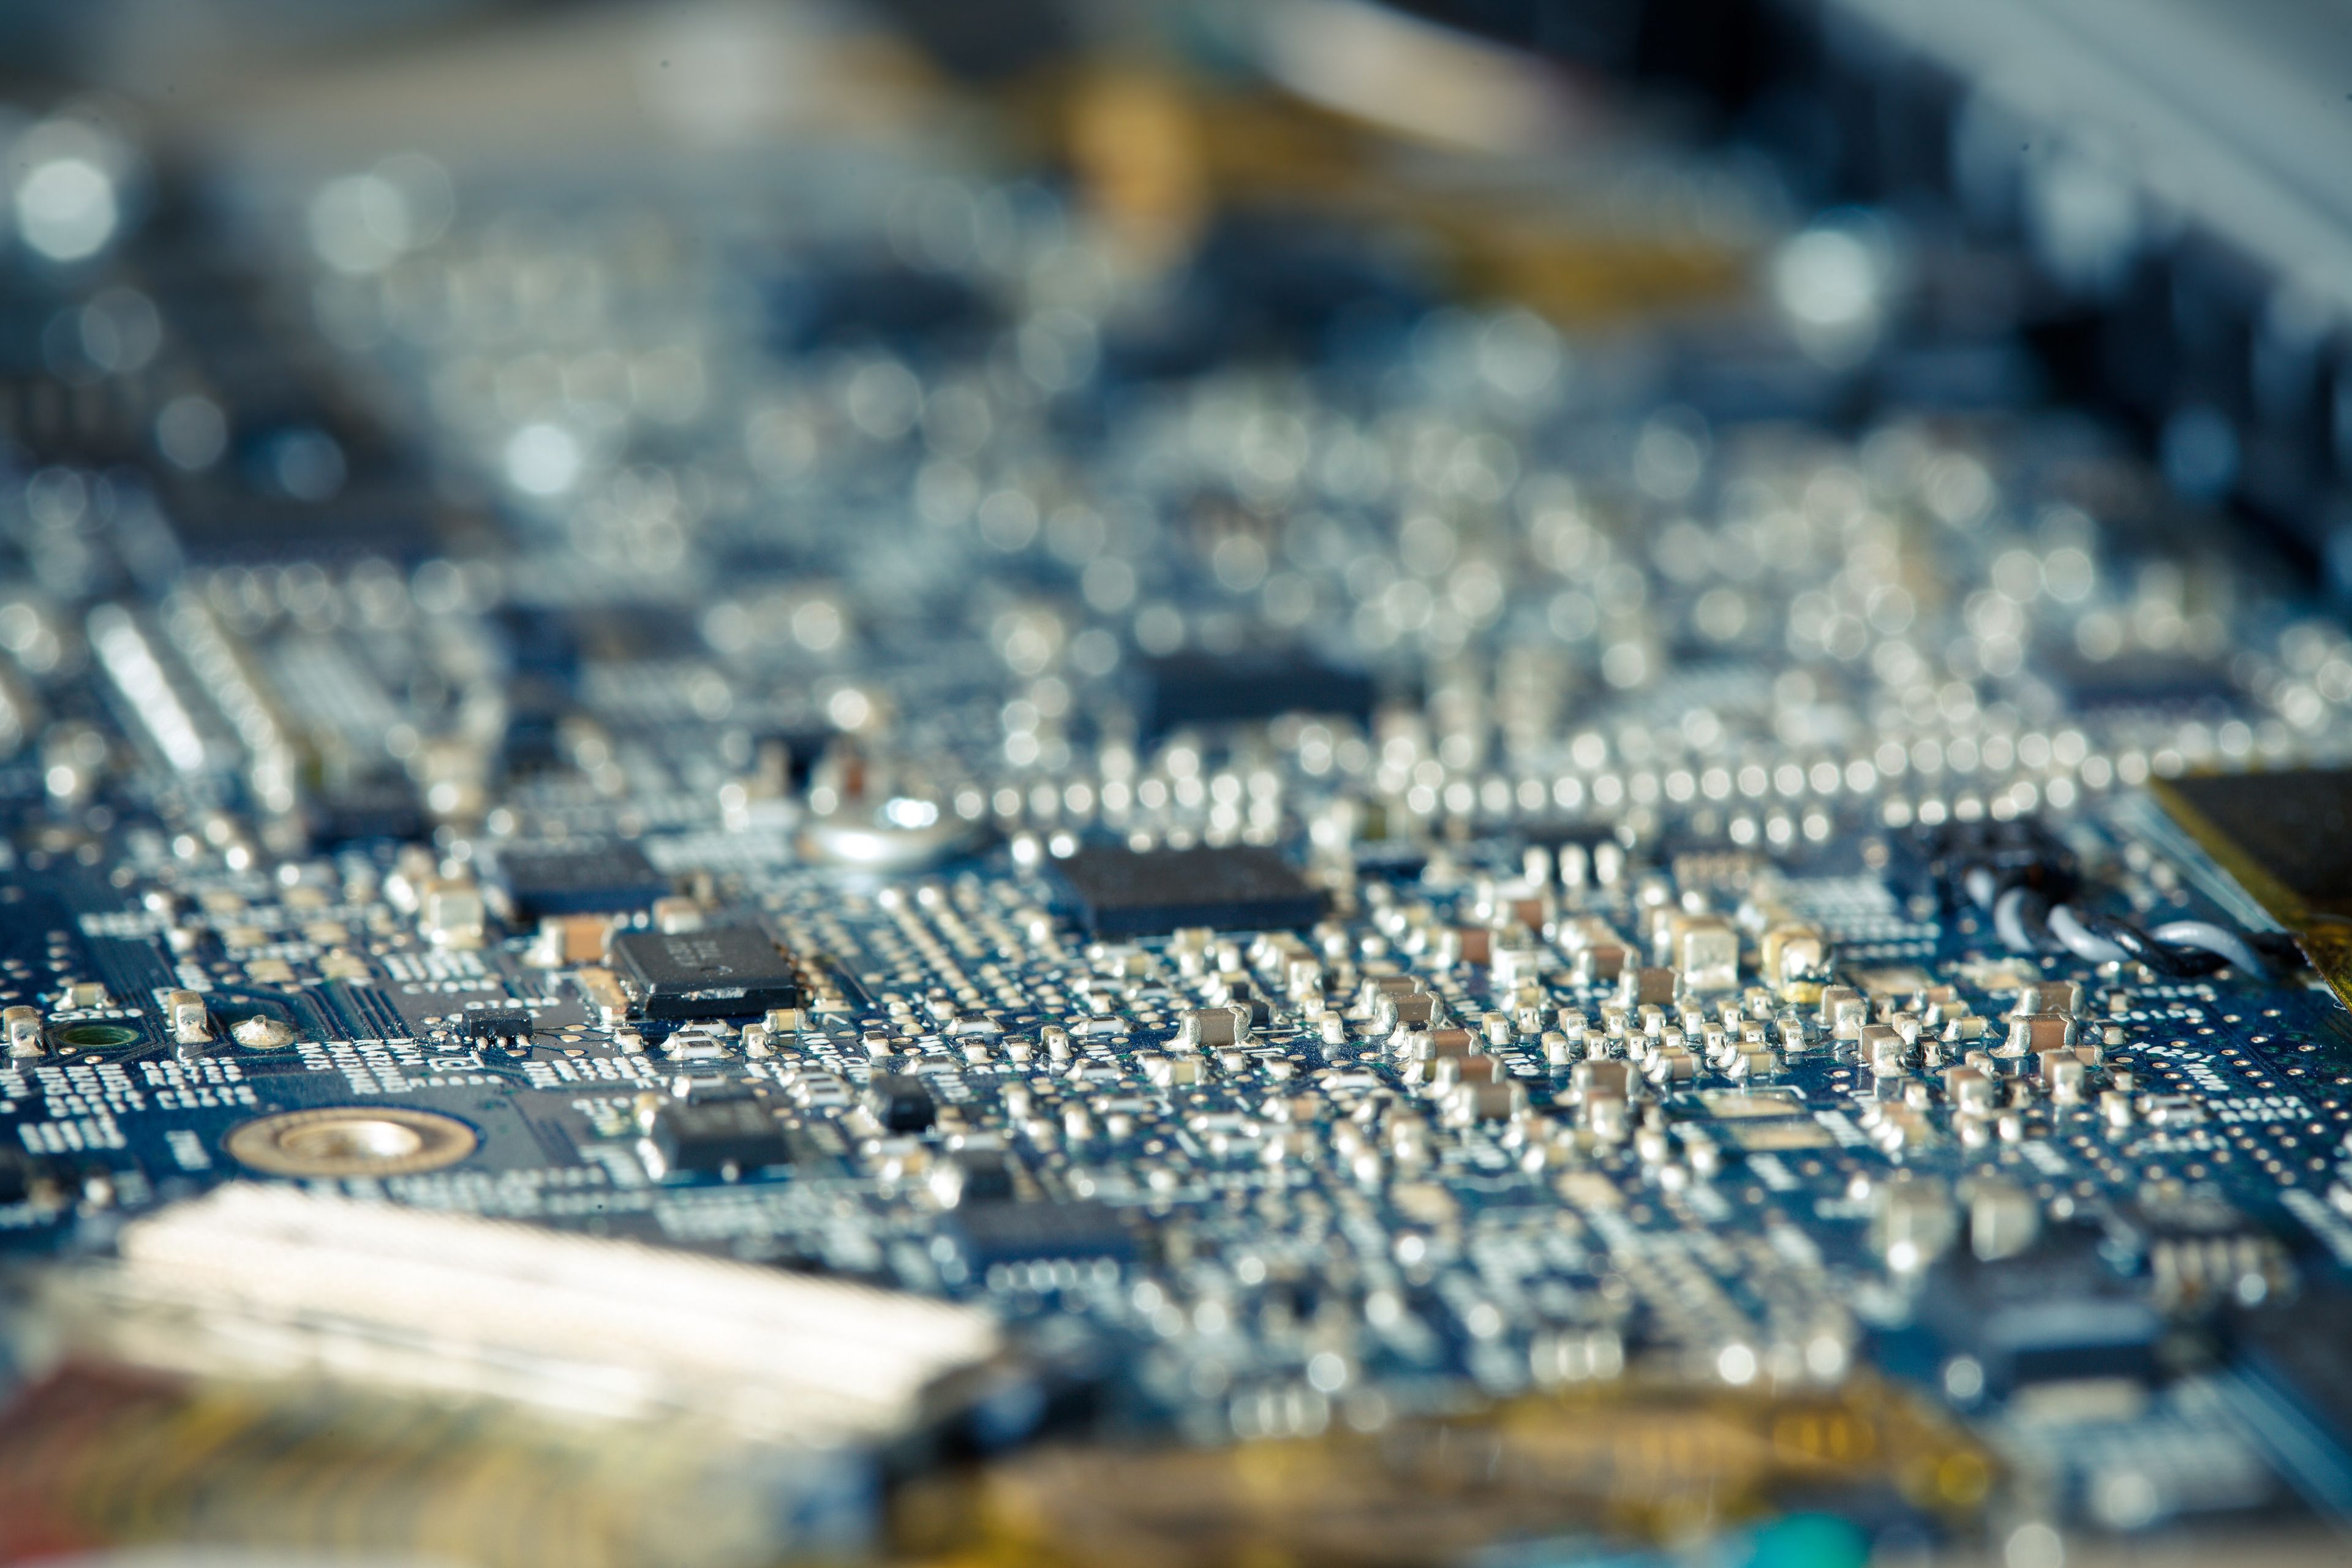 An image of a circuit board.